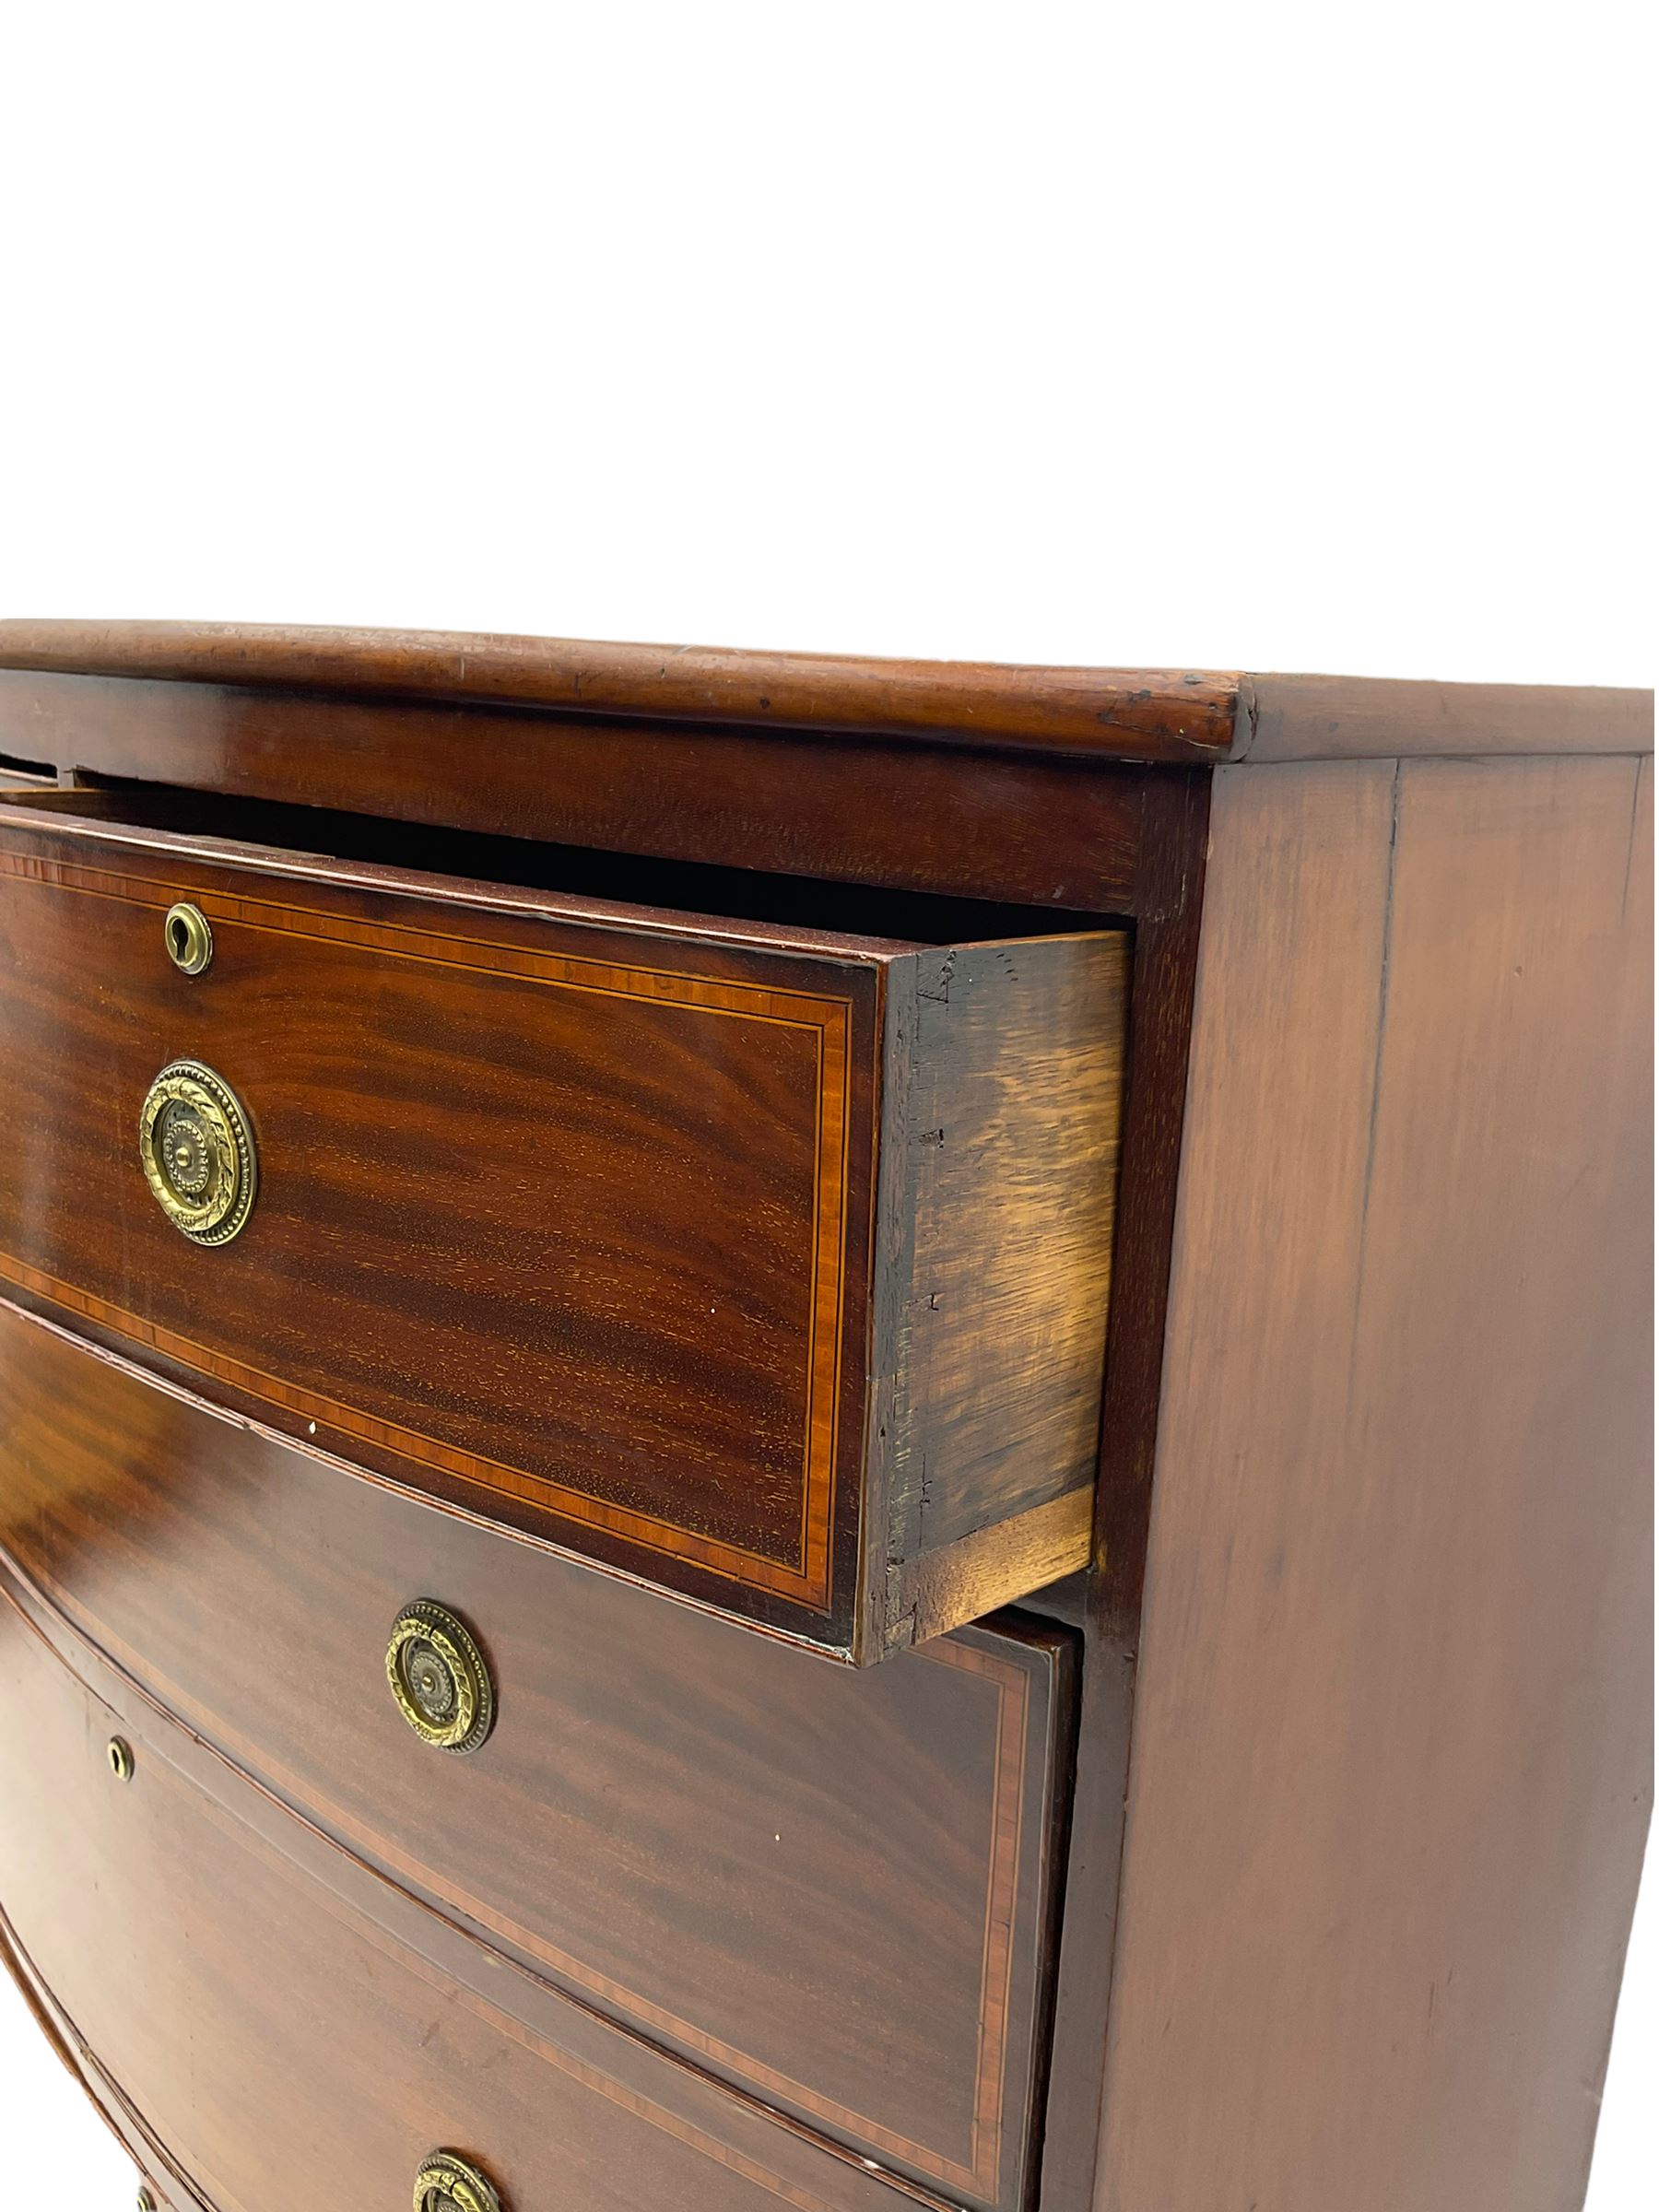 19th century inlaid mahogany bow front chest - Image 6 of 7